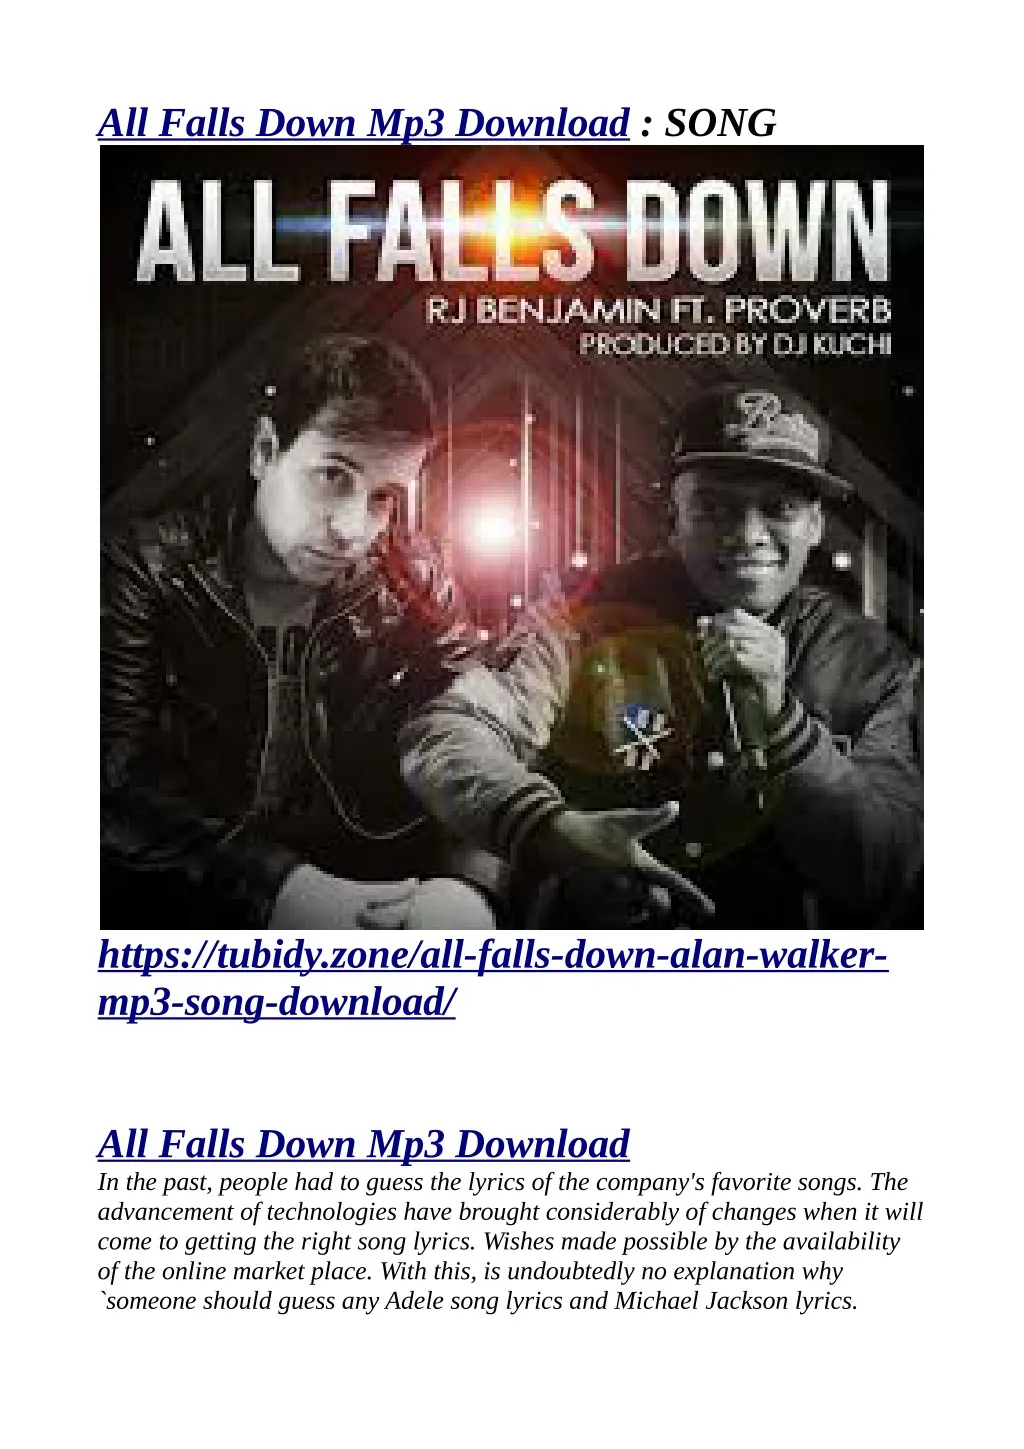 all falls down mp3 download song